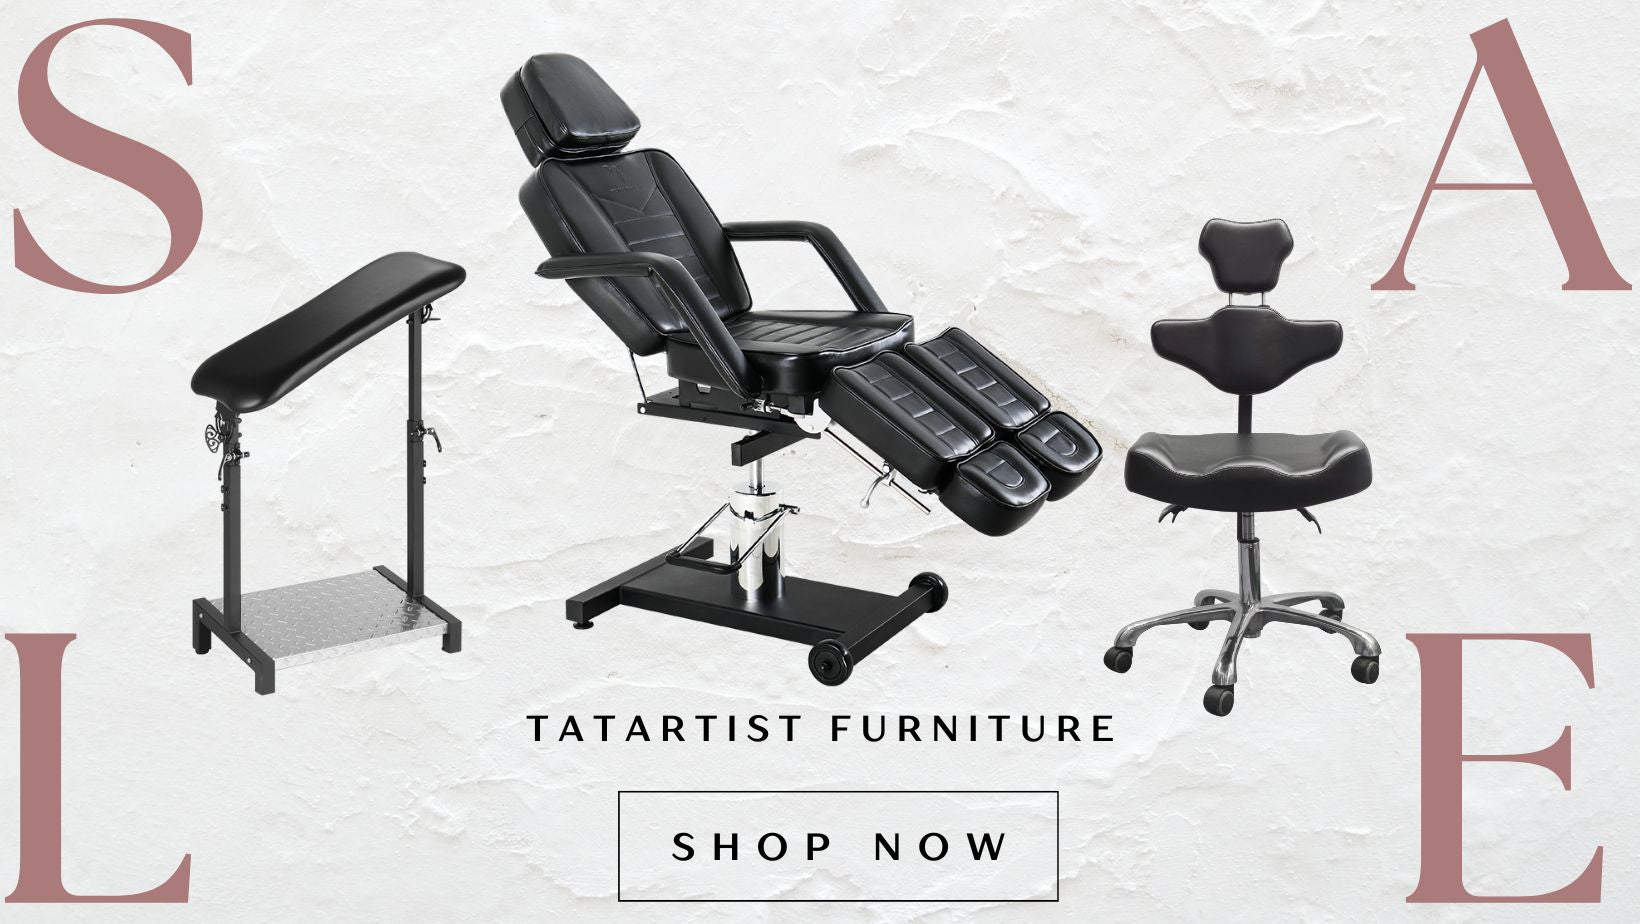 Everything for your tattoo studio | TATARTIST Furniture